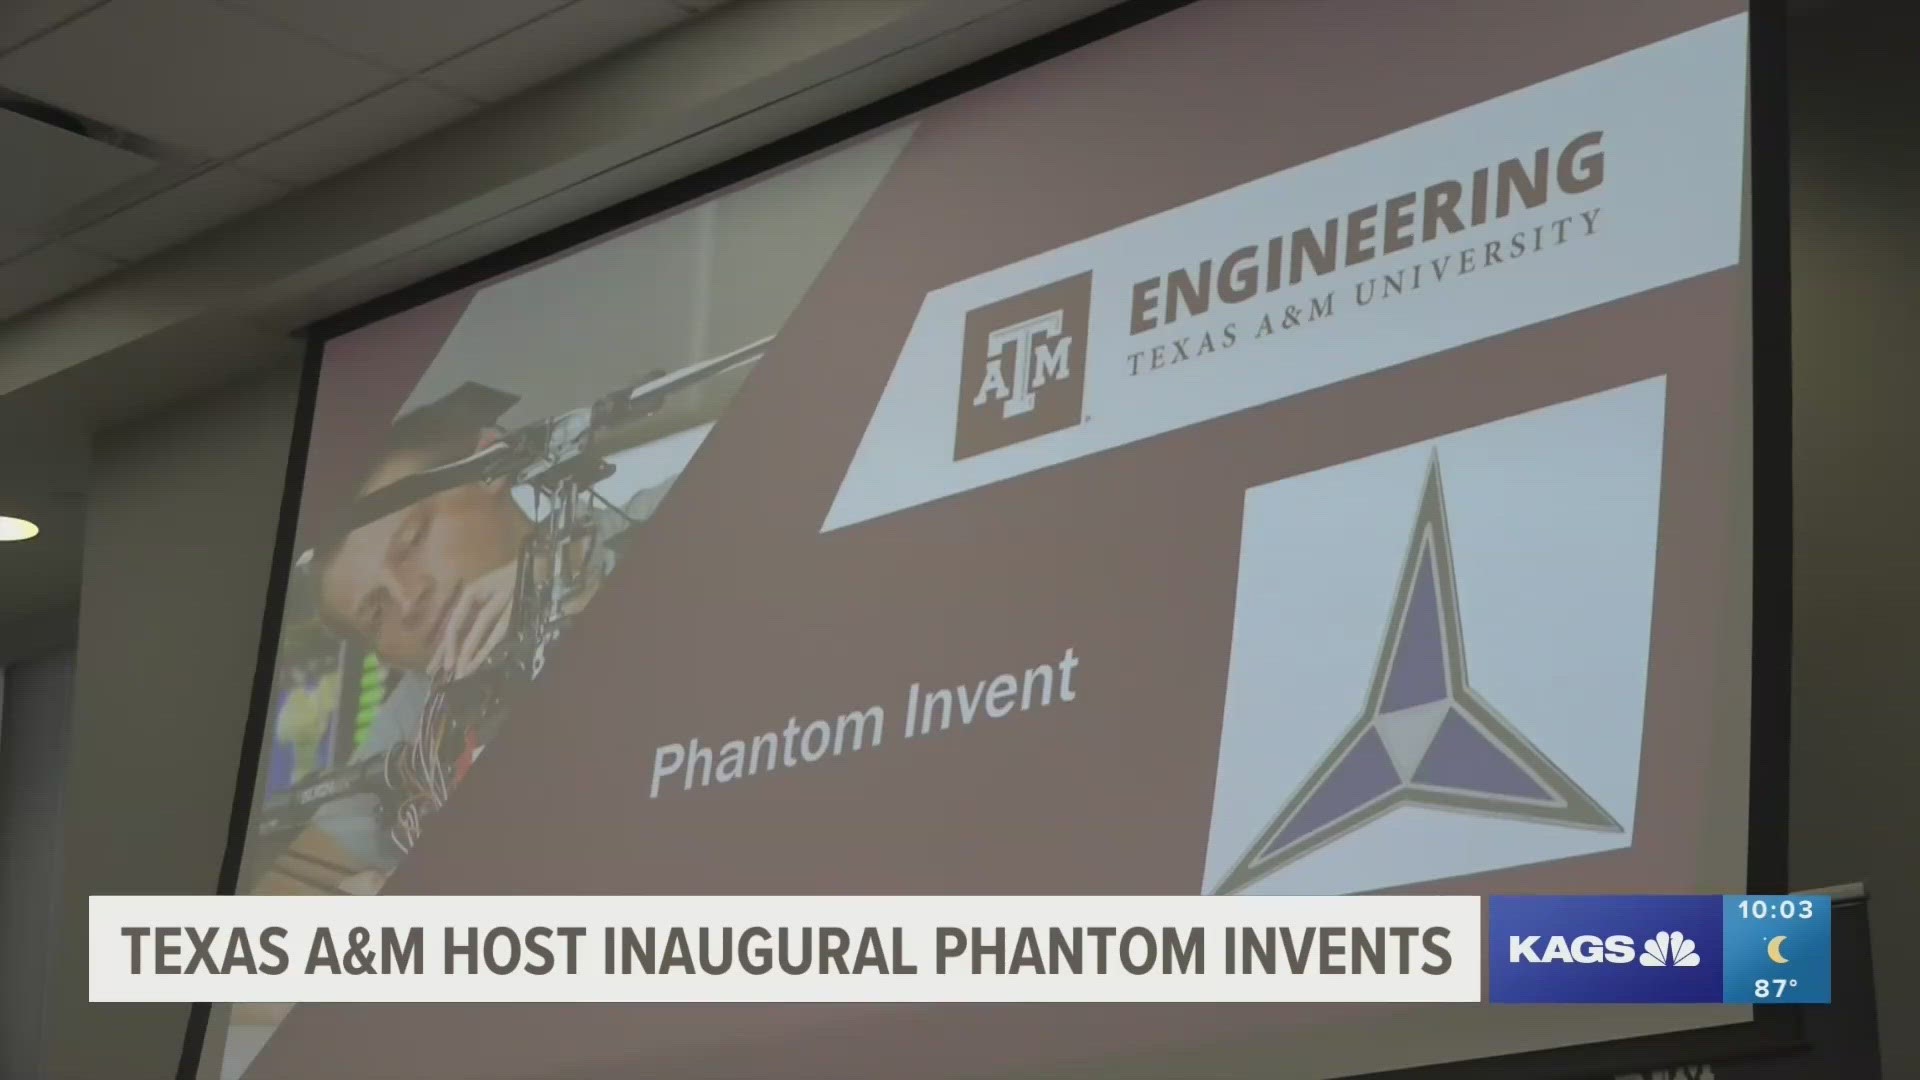 The event is a collaboration effort between Aggie students and military members looking to integrate the most cutting edge technology into their operations.